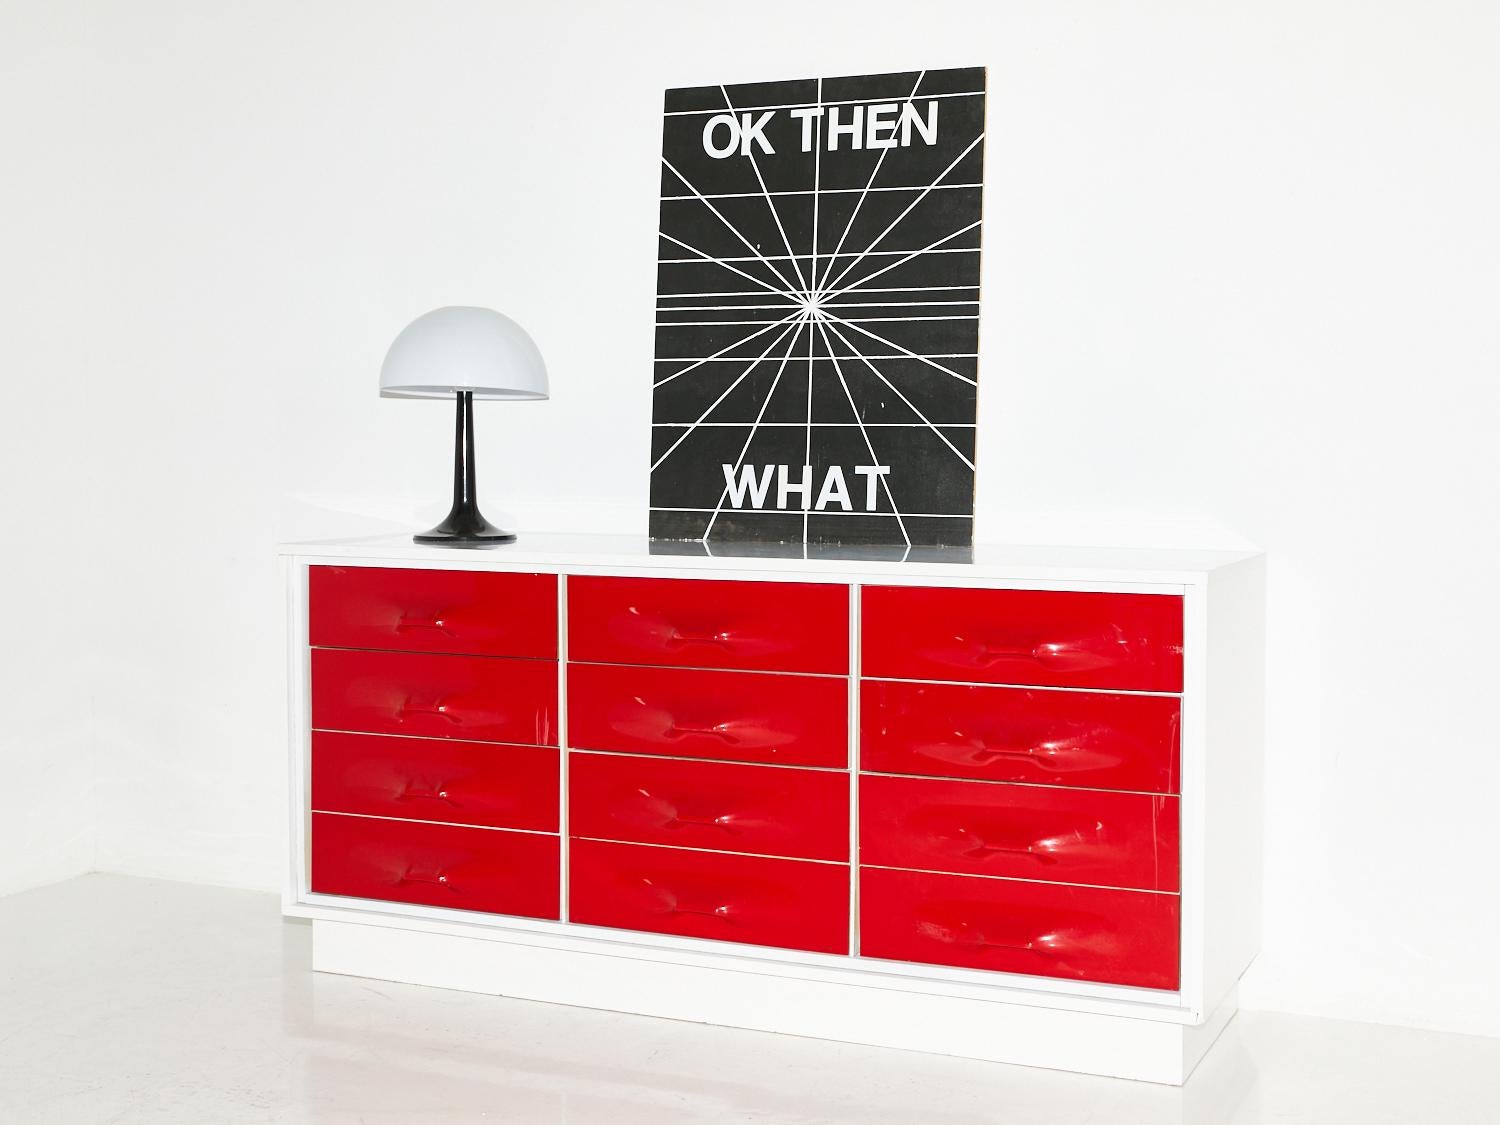 With its vibrant red color and sleek space-age design, this dresser designed by Giovanni Maur for Treco brings a retro-futuristic flair to any interior, making a statement that is out of this world.

Giovanni Maur is a visionary furniture designer